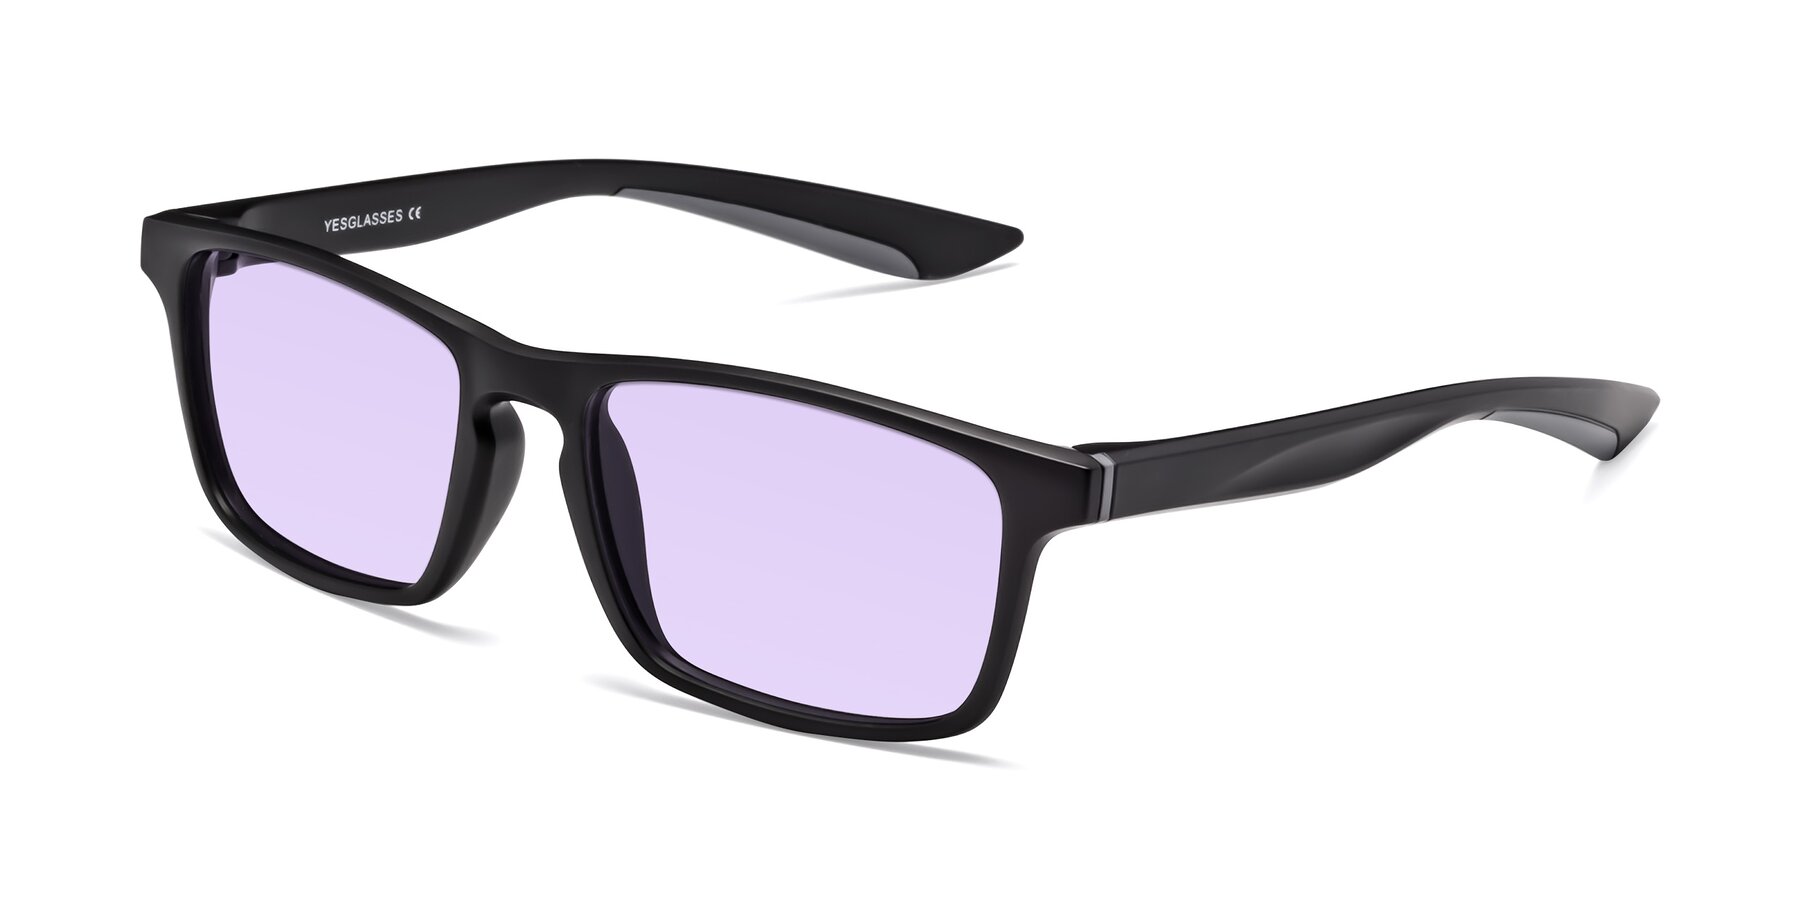 Angle of Passion in Matte Black-Gray with Light Purple Tinted Lenses